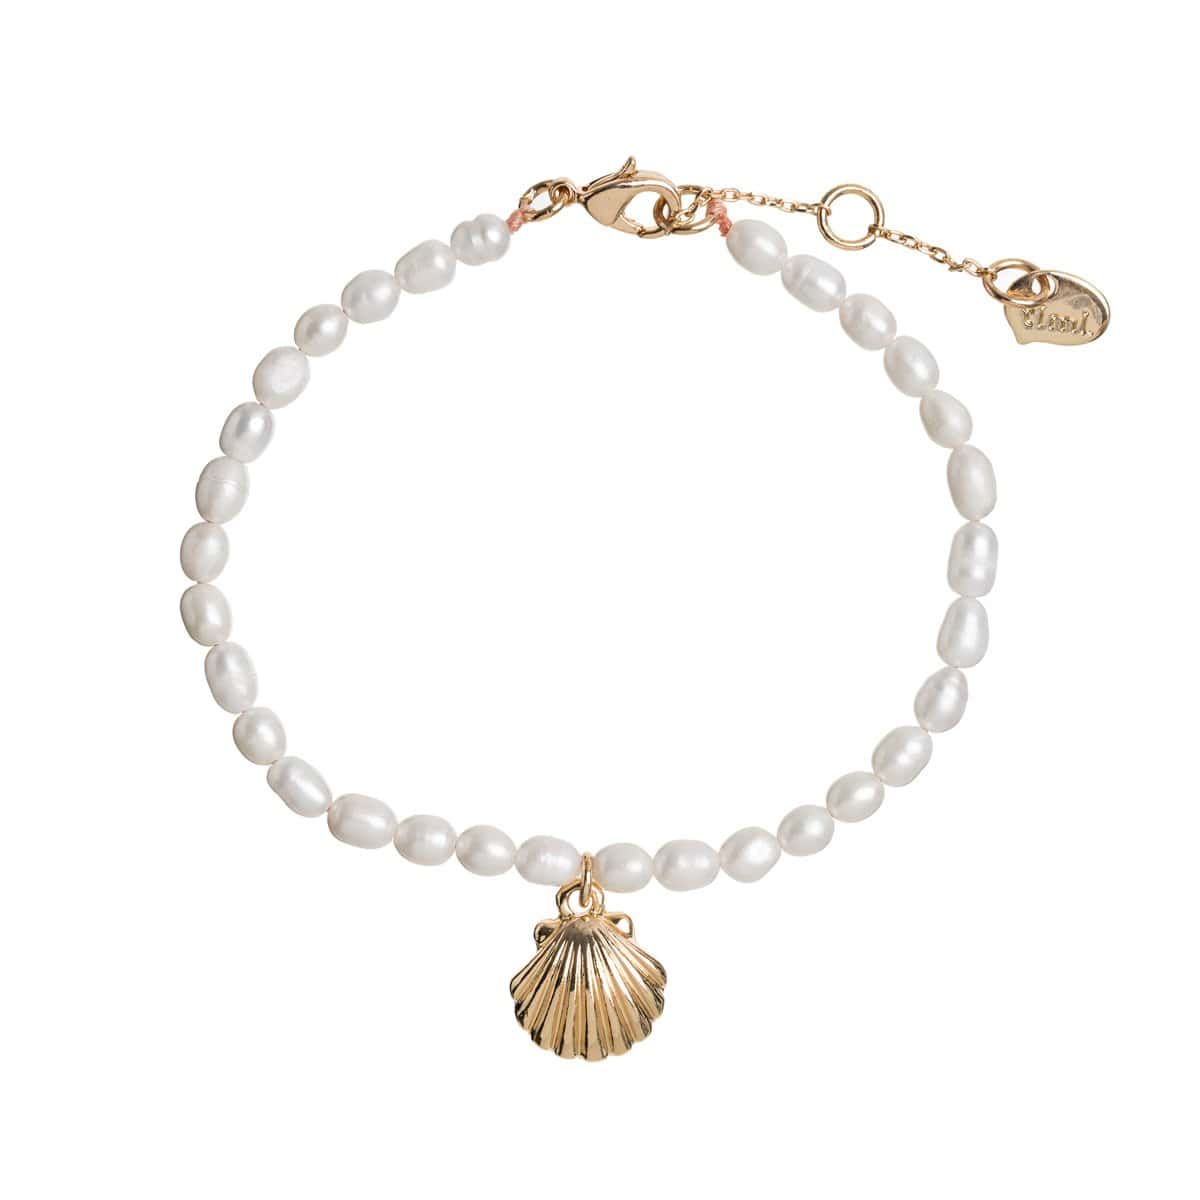 Mermaid Shell and Beads Bracelet - Gold